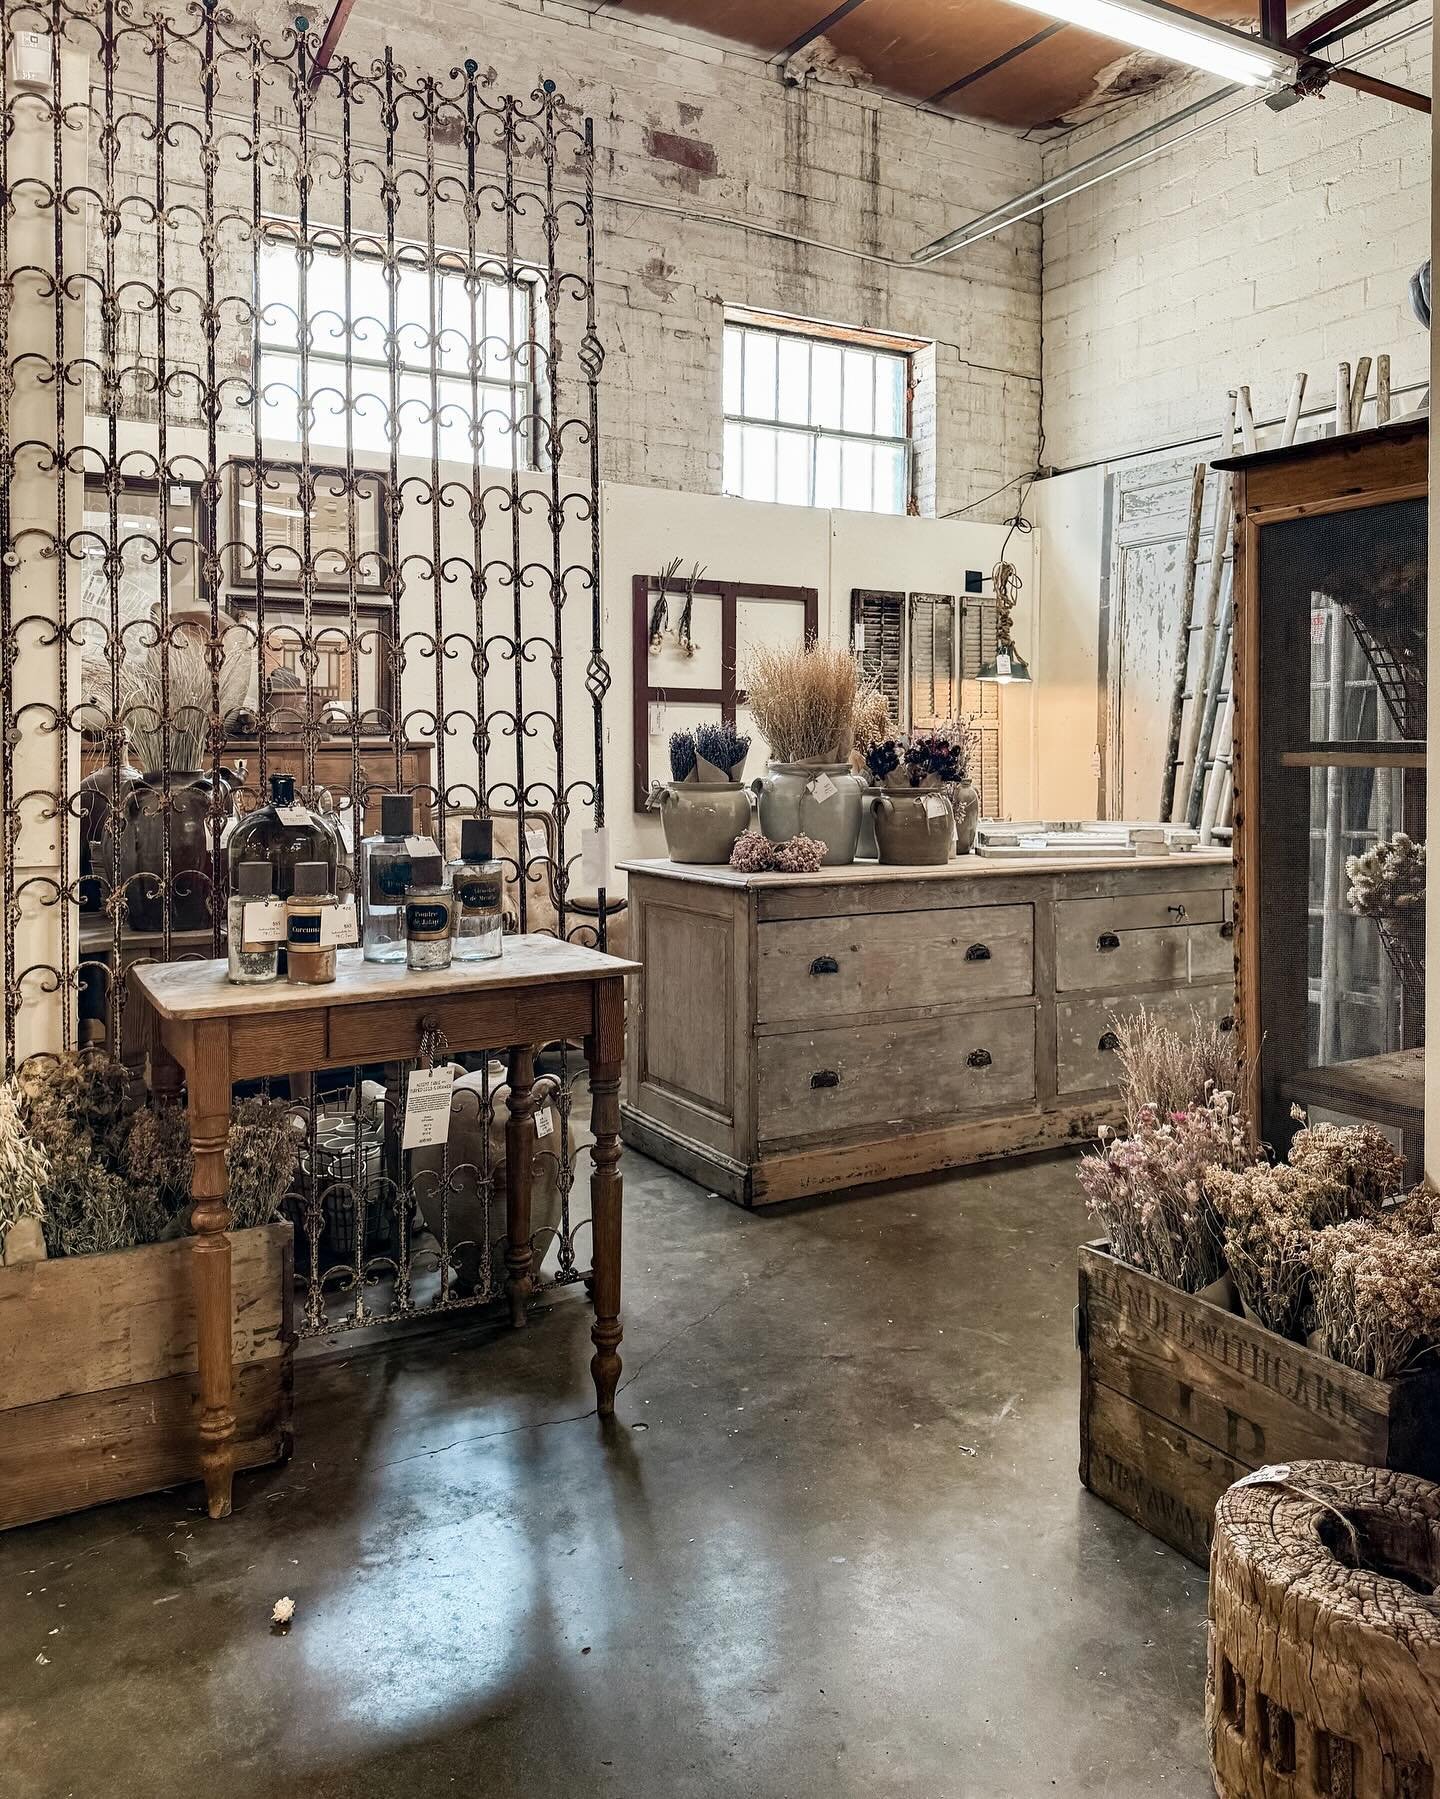 As you know, we do not have a retail store... however, we would like to remind you that you can still shop our little corner inside Benny Jack Antiques located in the Dallas Design District seven days a week!

We have refreshed the space (again!) and